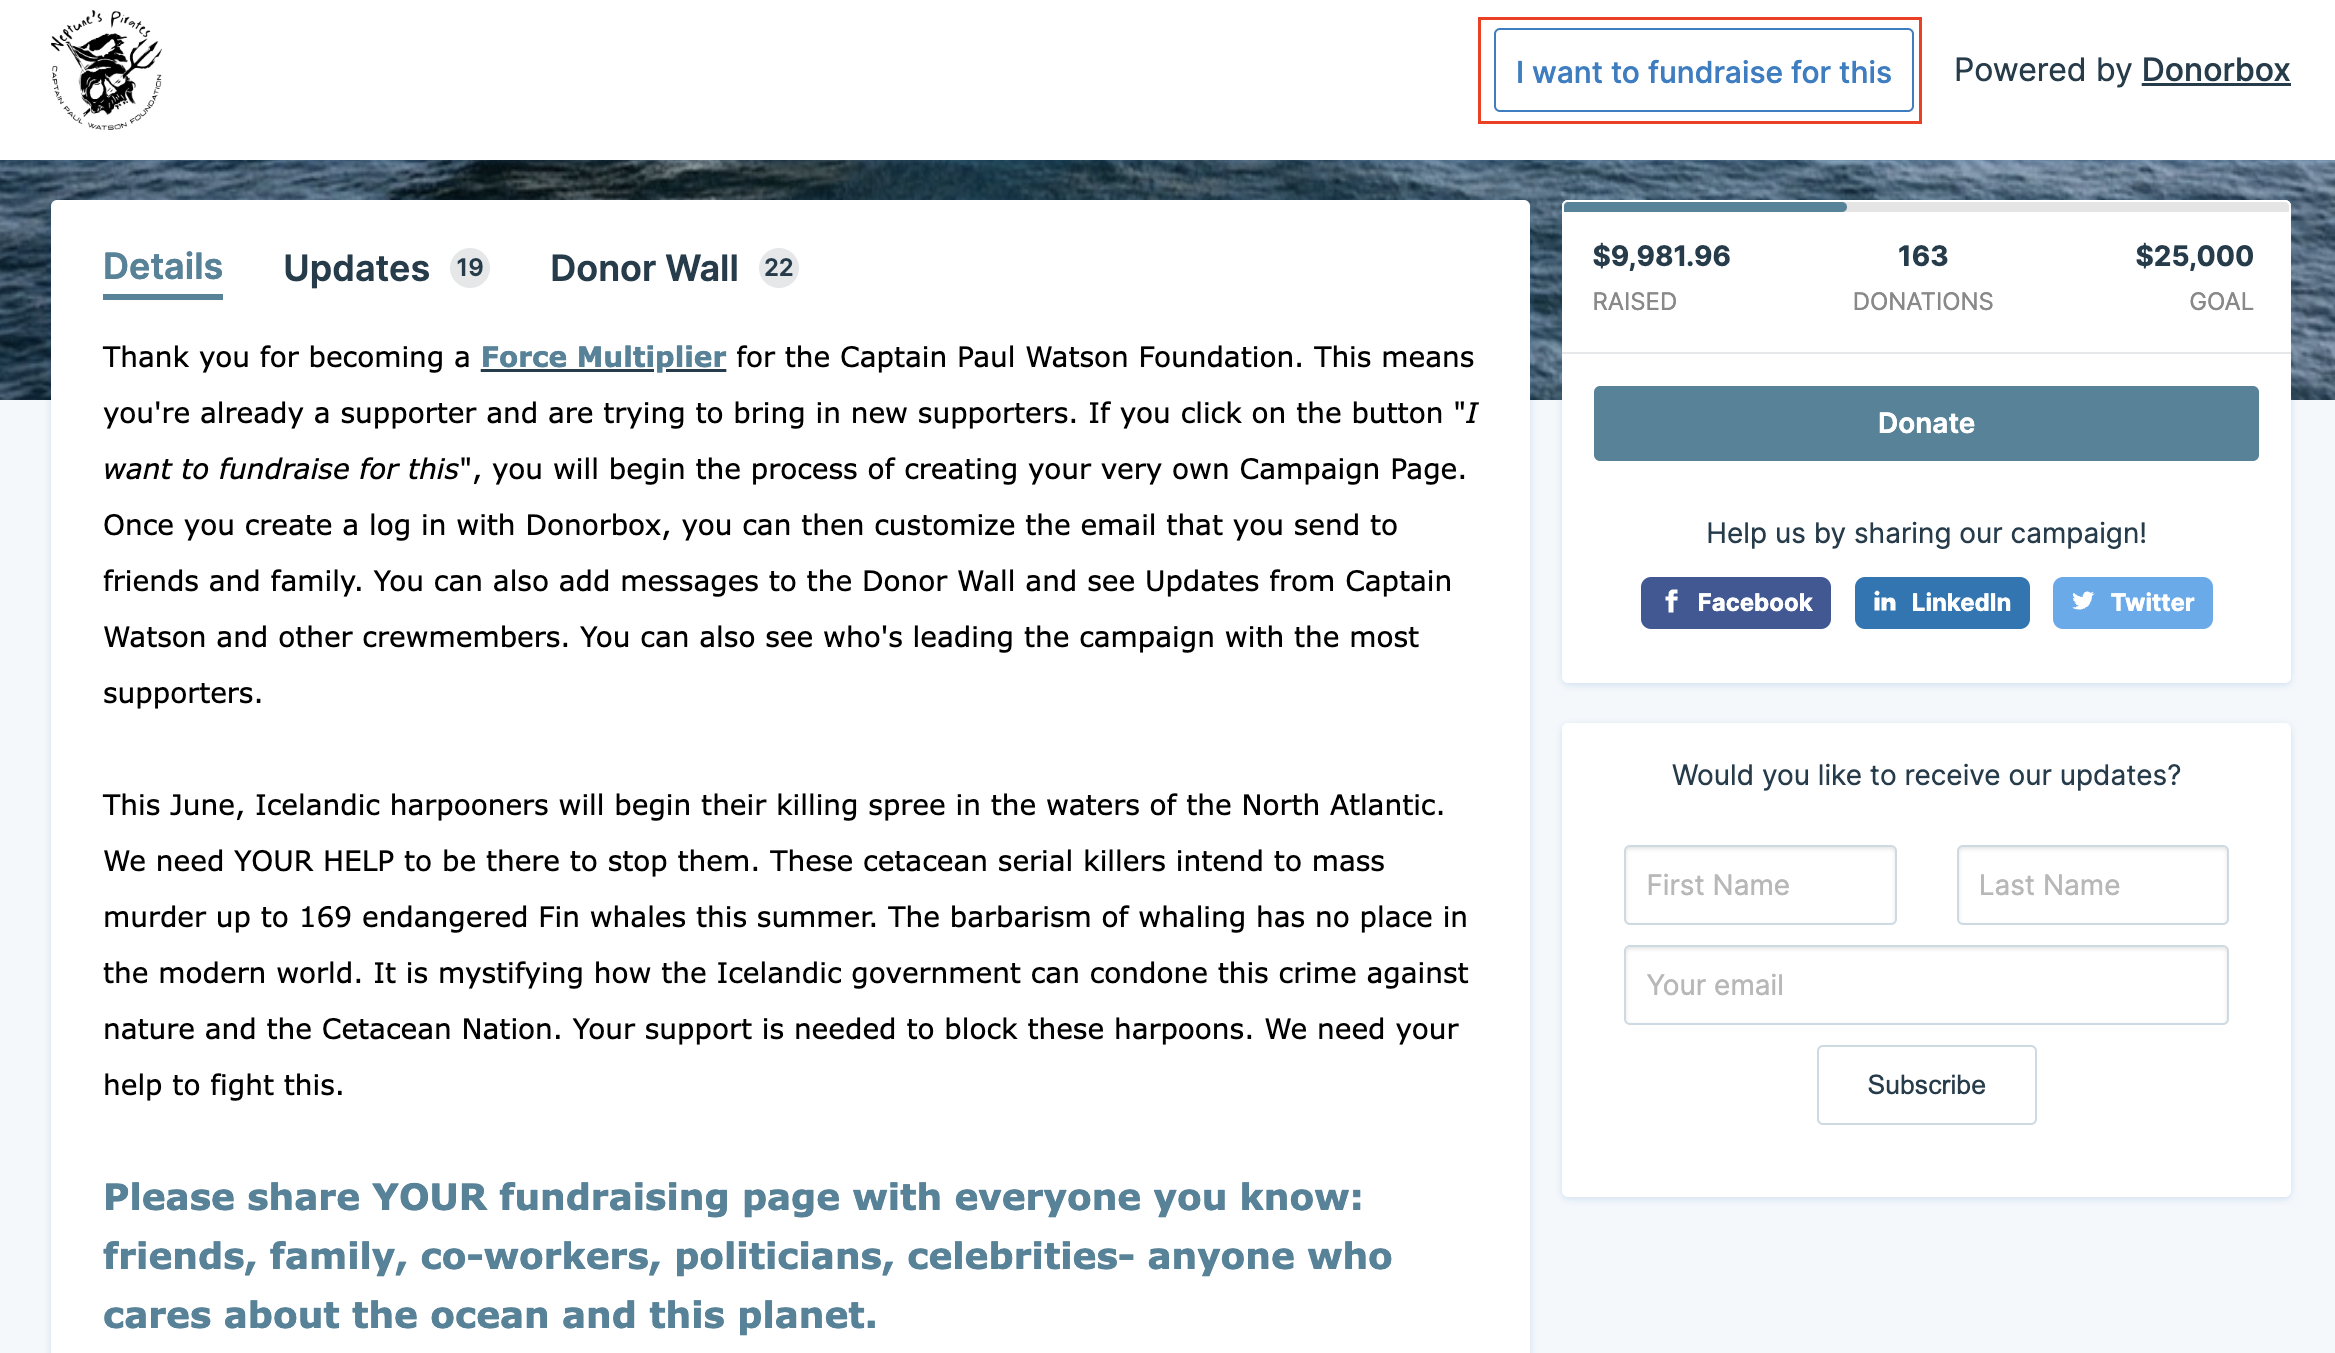 Example of an organization using a Donorbox peer-to-peer fundraising page as a virtual fundraiser.